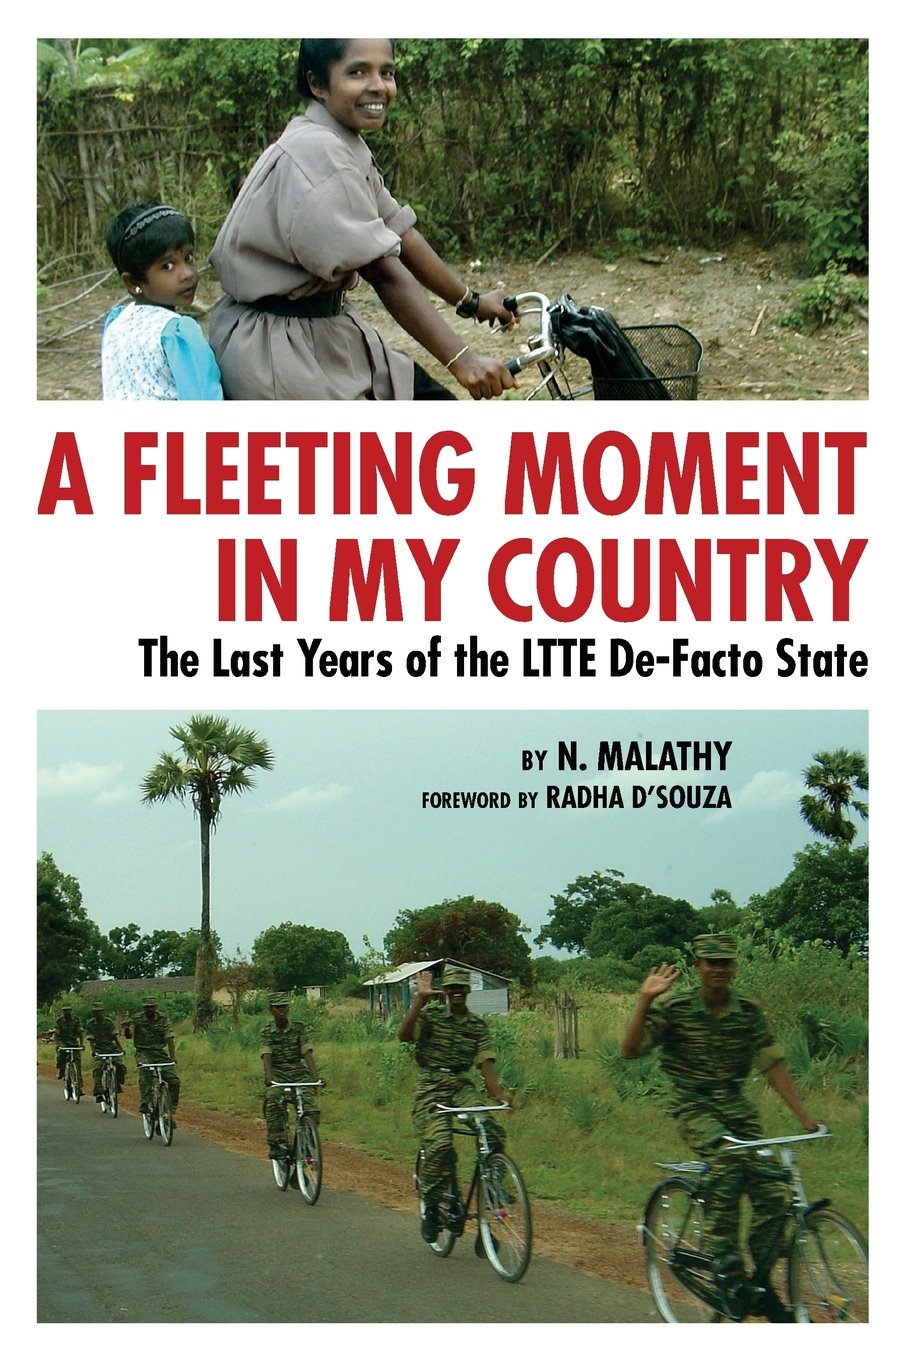 A Fleeting Moment in My Country: The Last Years of the LTTE De-Facto State